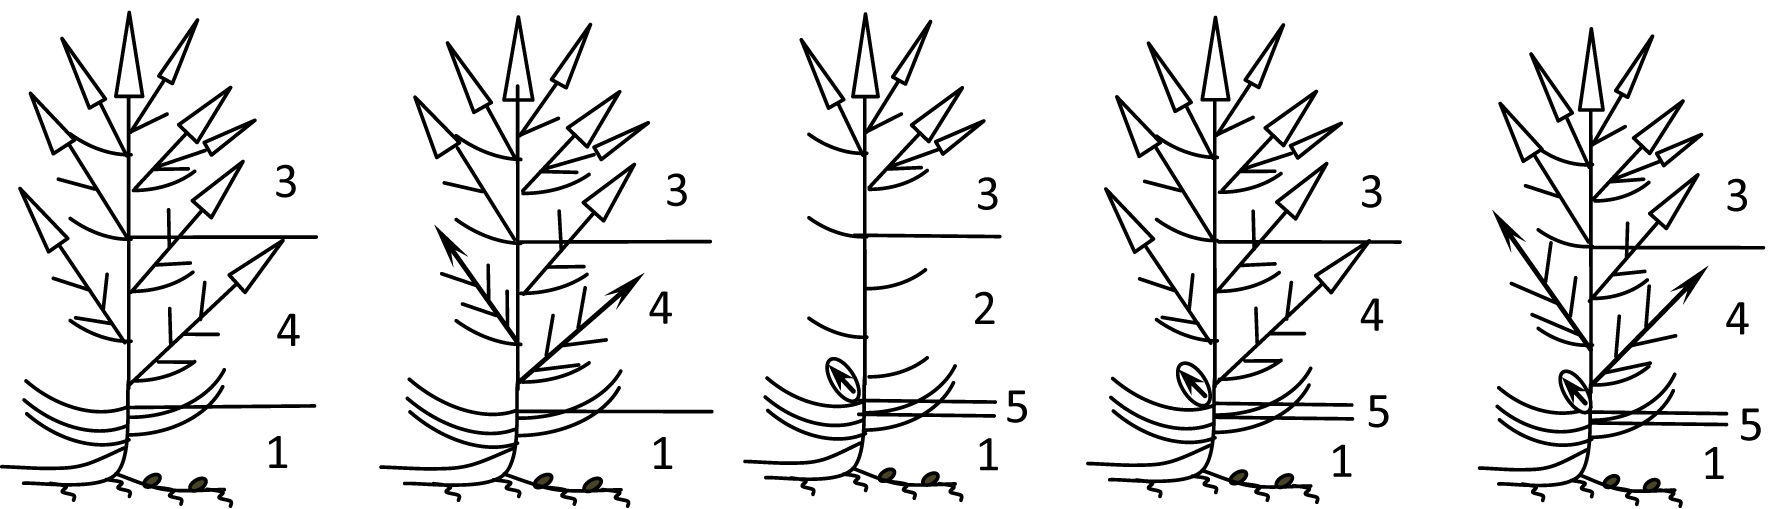 Fig. 1. Morphological multiplicity monocarpic shoots of R. × anceps: 1 – lower zone of inhibition; 2 – medium zone of inhibition; 3 – main inflorescence; 4 – amplification zone; 5 – innovation zone.